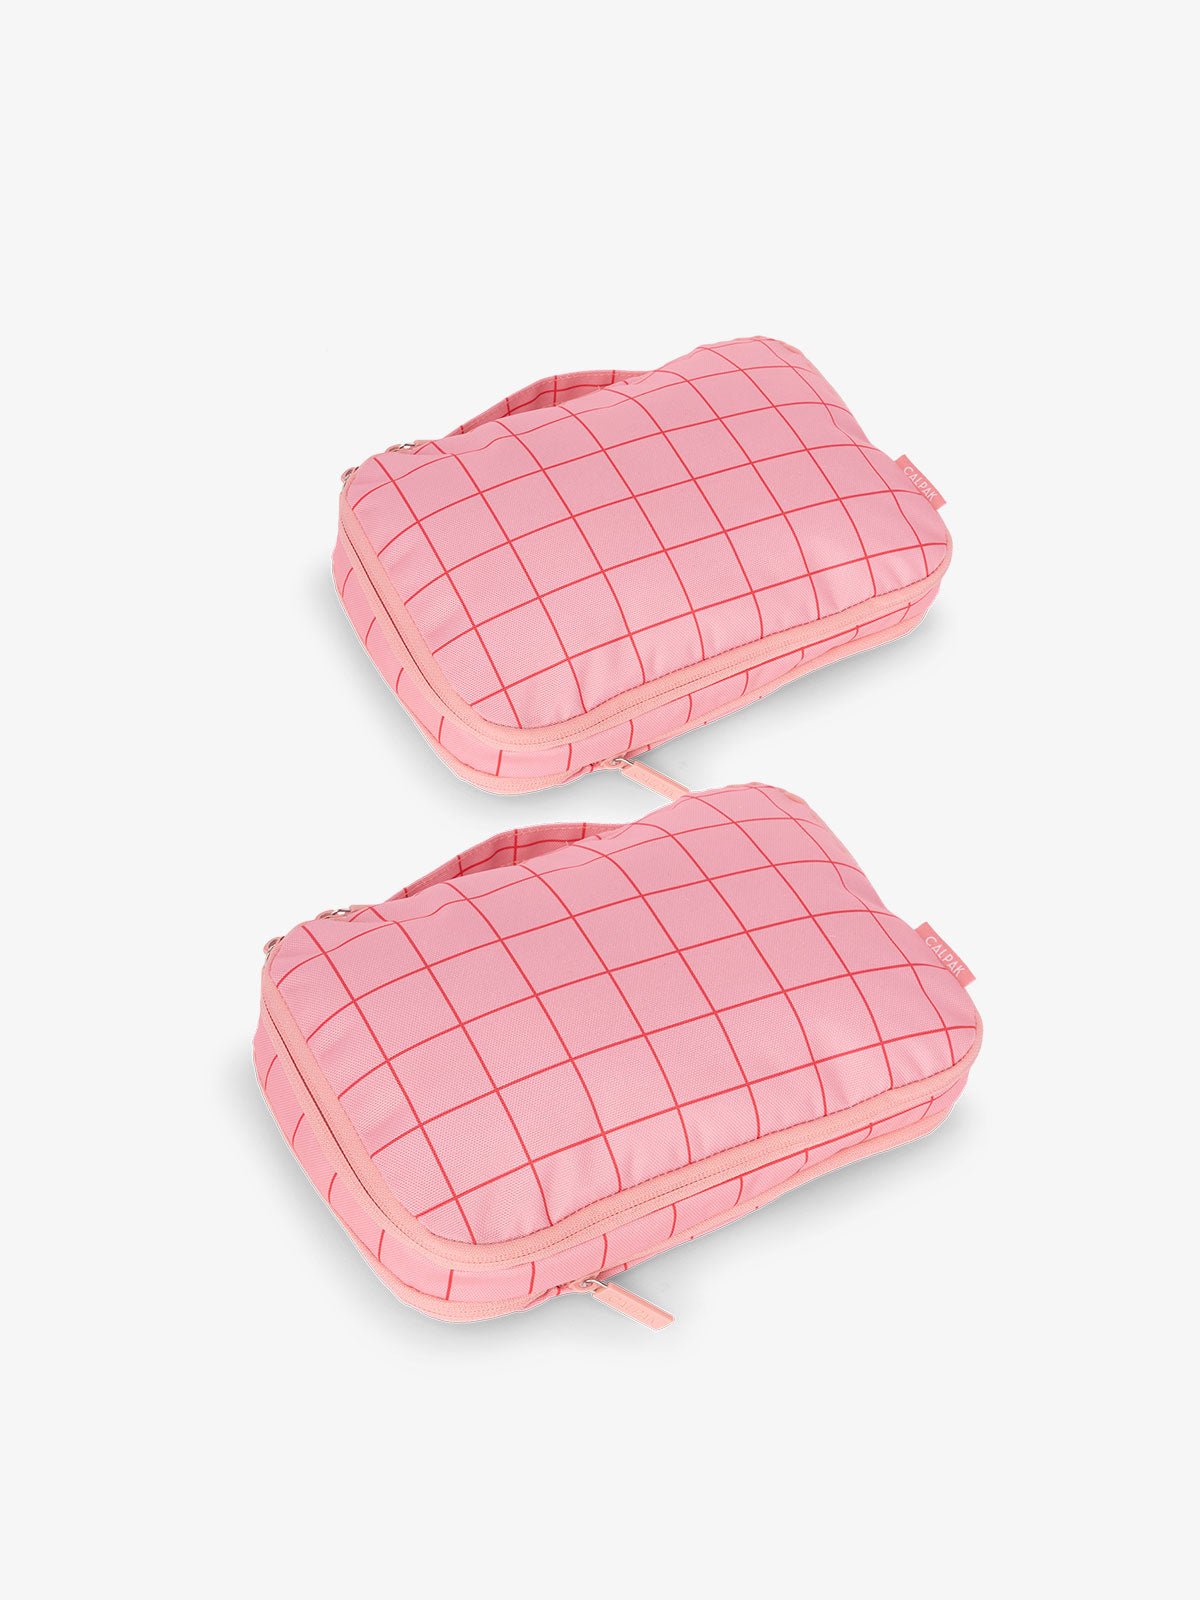 CALPAK small compression packing cubes in pink